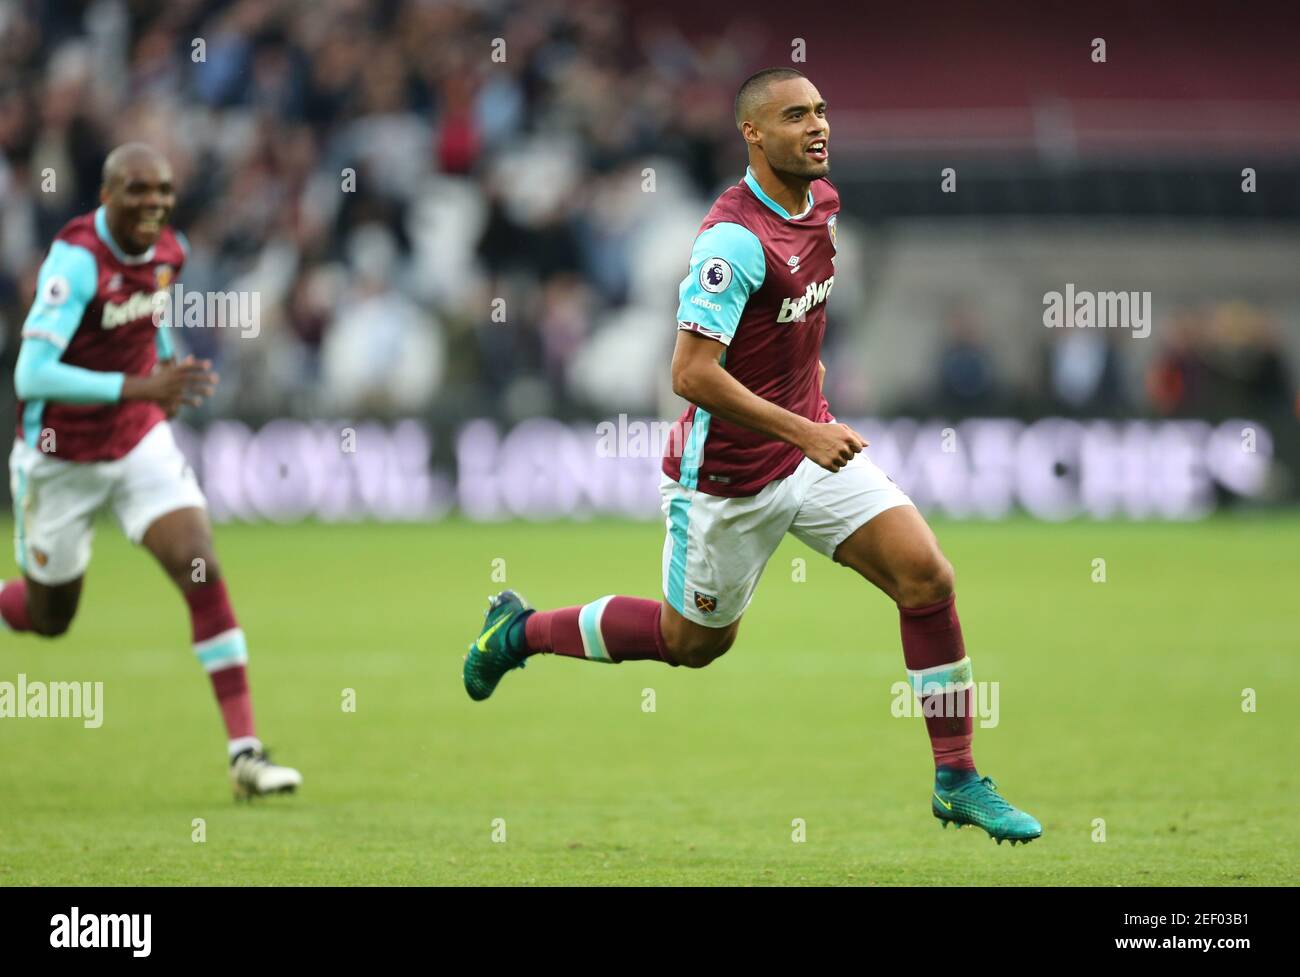 Britain Soccer Football - West Ham United v Sunderland - Premier League - London Stadium - 22/10/16 West Ham United's Winston Reid celebrates scoring their first goal  Reuters / Paul Hackett Livepic EDITORIAL USE ONLY. No use with unauthorized audio, video, data, fixture lists, club/league logos or 'live' services. Online in-match use limited to 45 images, no video emulation. No use in betting, games or single club/league/player publications.  Please contact your account representative for further details. Stock Photo